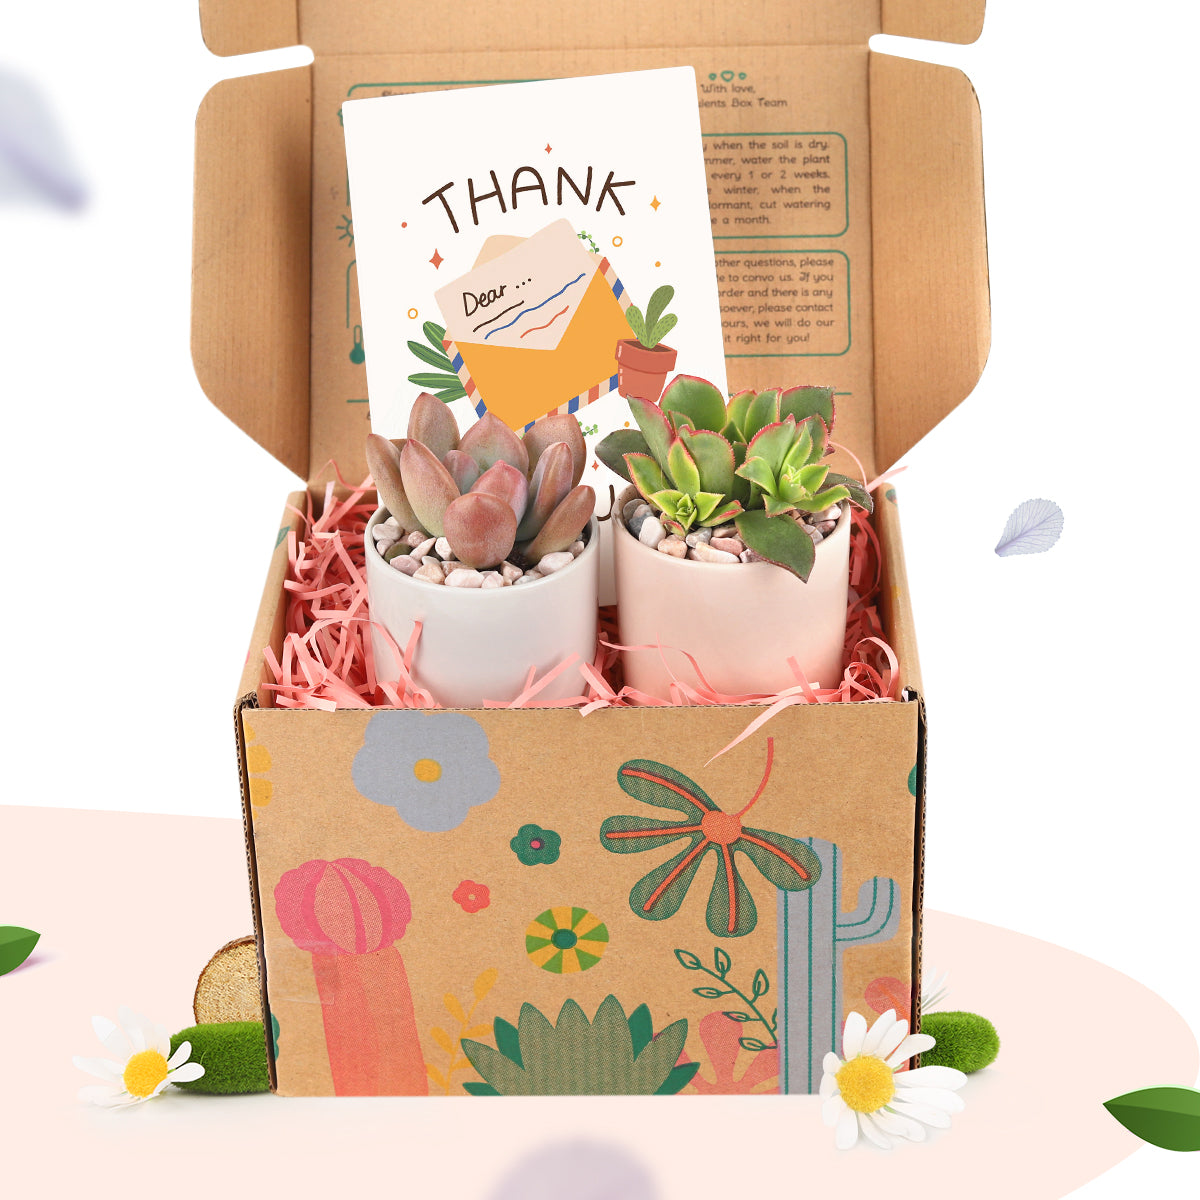 live succulent gift boxes for sale online, succulent plant gift ideas, Memorable gifts for any occasion, Mother's Day Succulent Gift Box for Sale, Buy Plant Gift for Mom, Mother's Day Plants Delivery